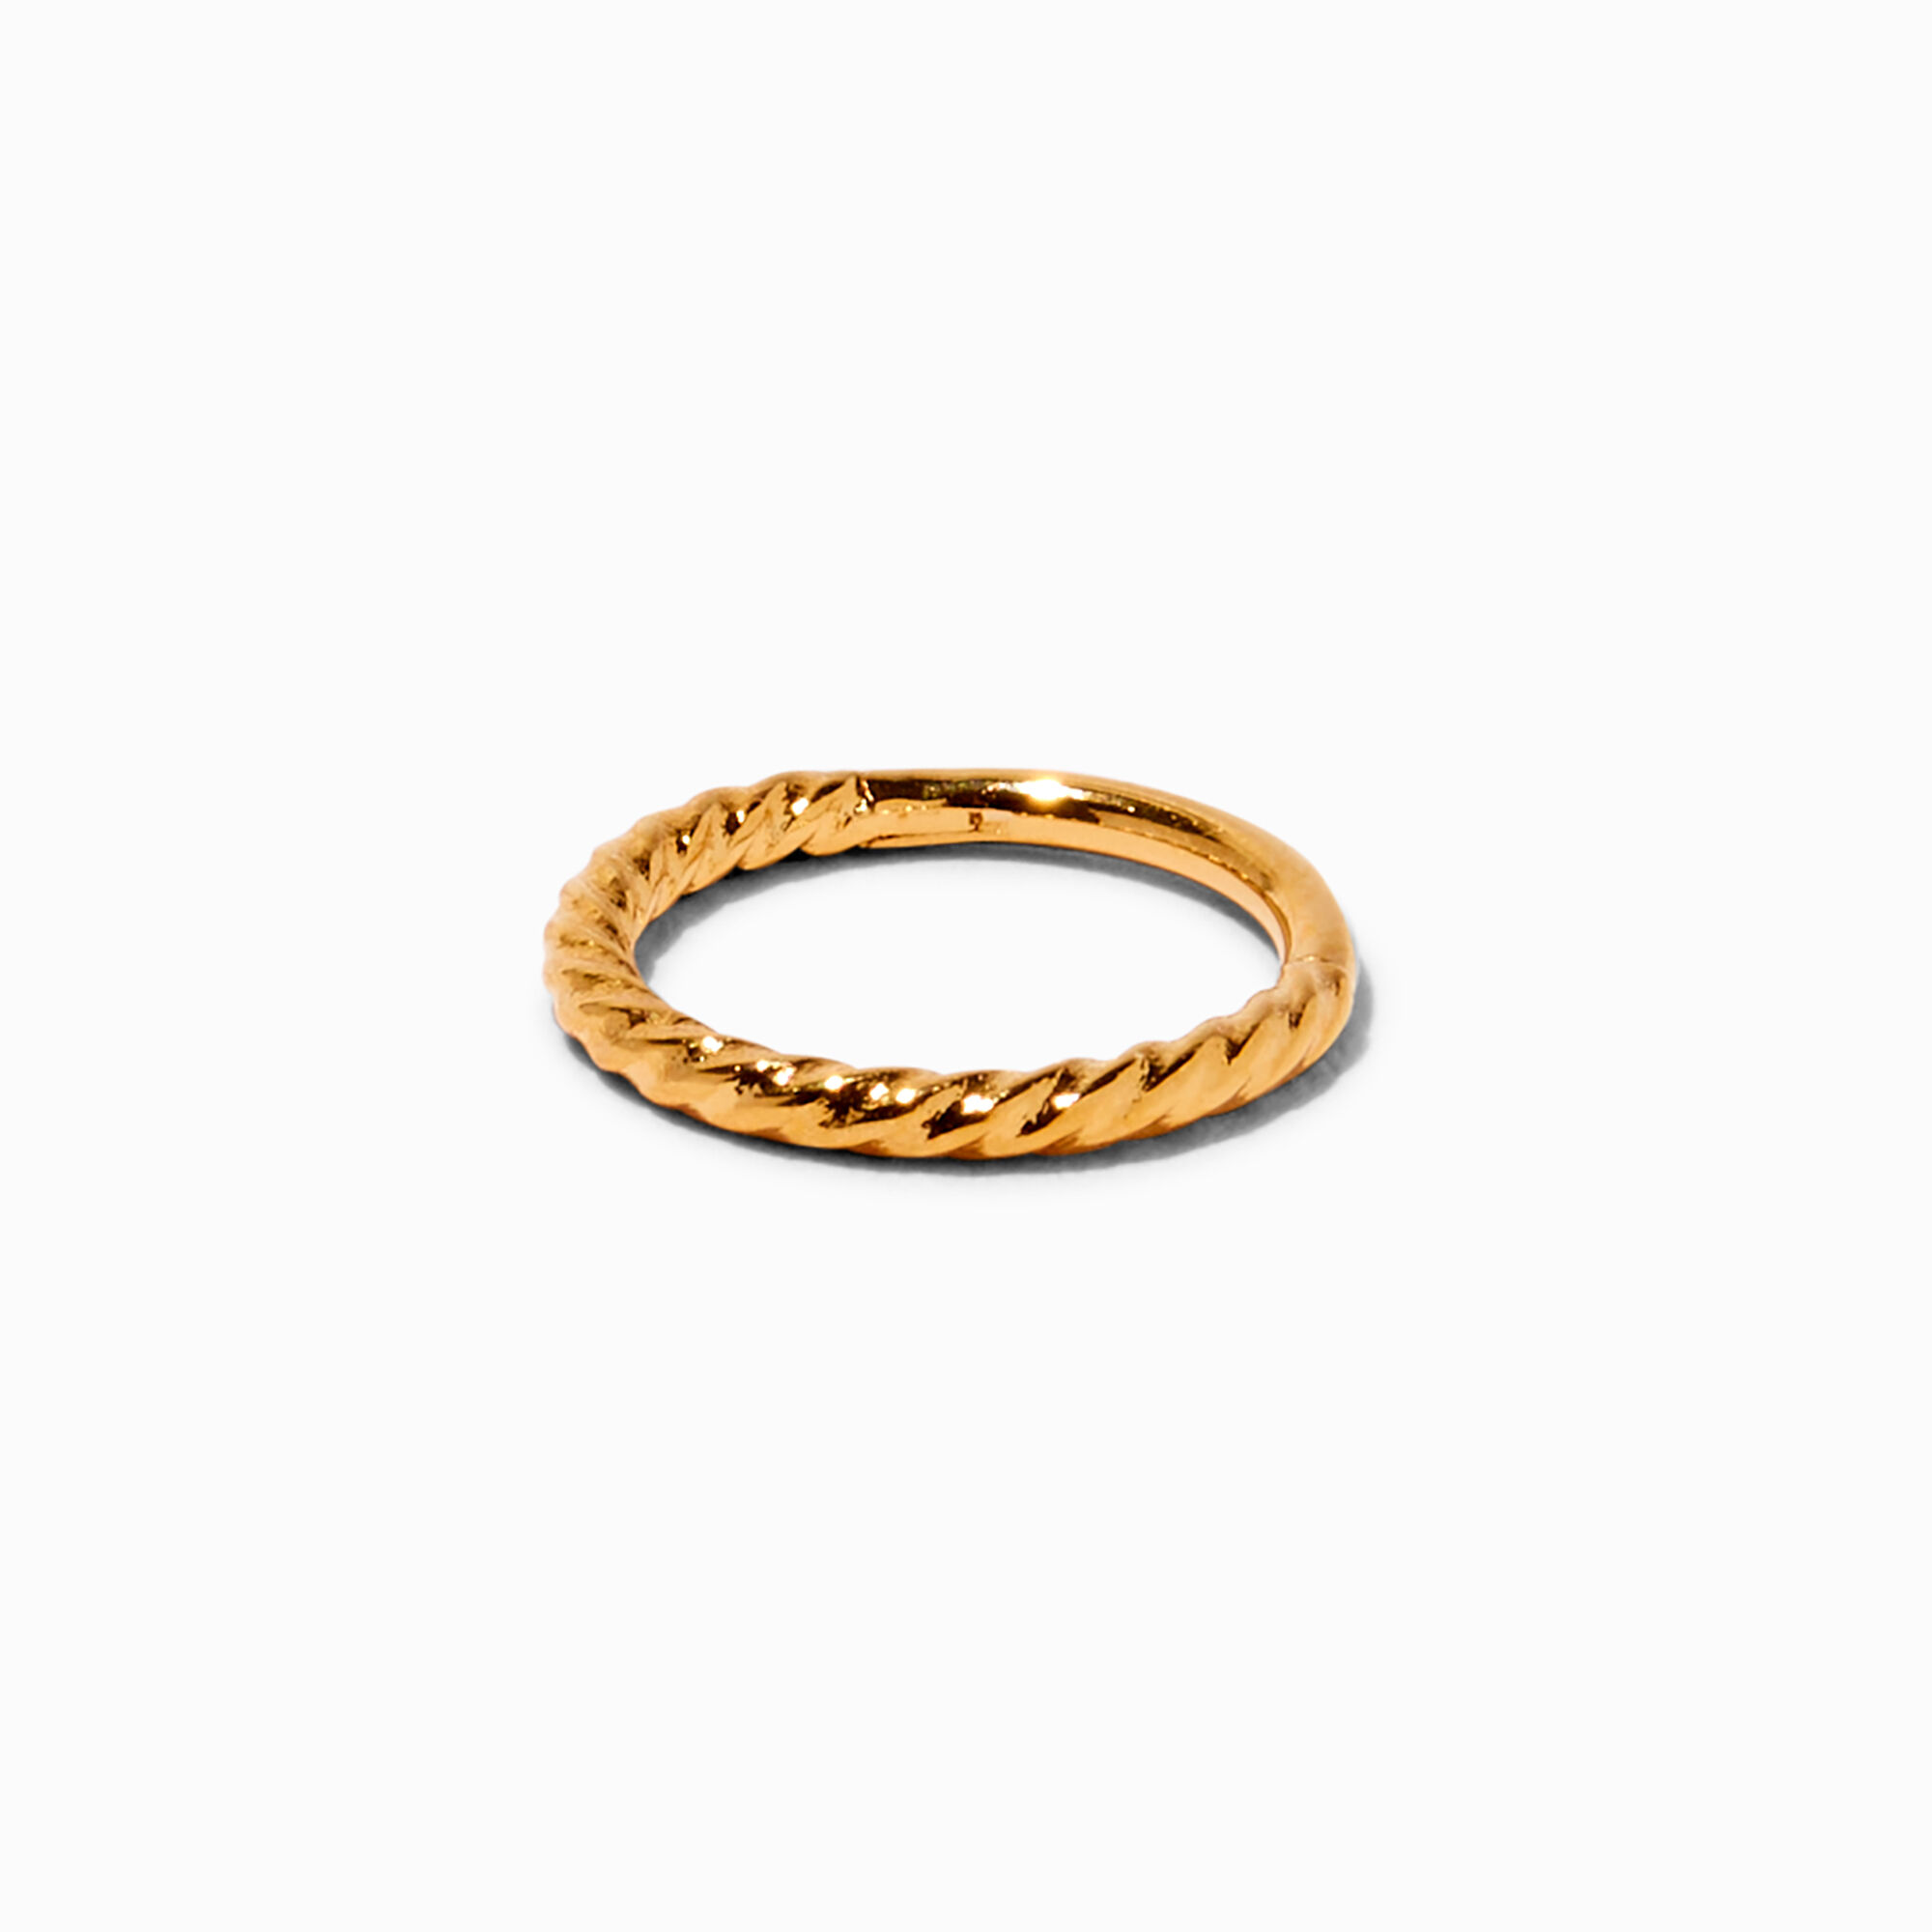 View Claires 18K Plated Titanium Braided 18G Clicker Hoop Nose Ring Gold information